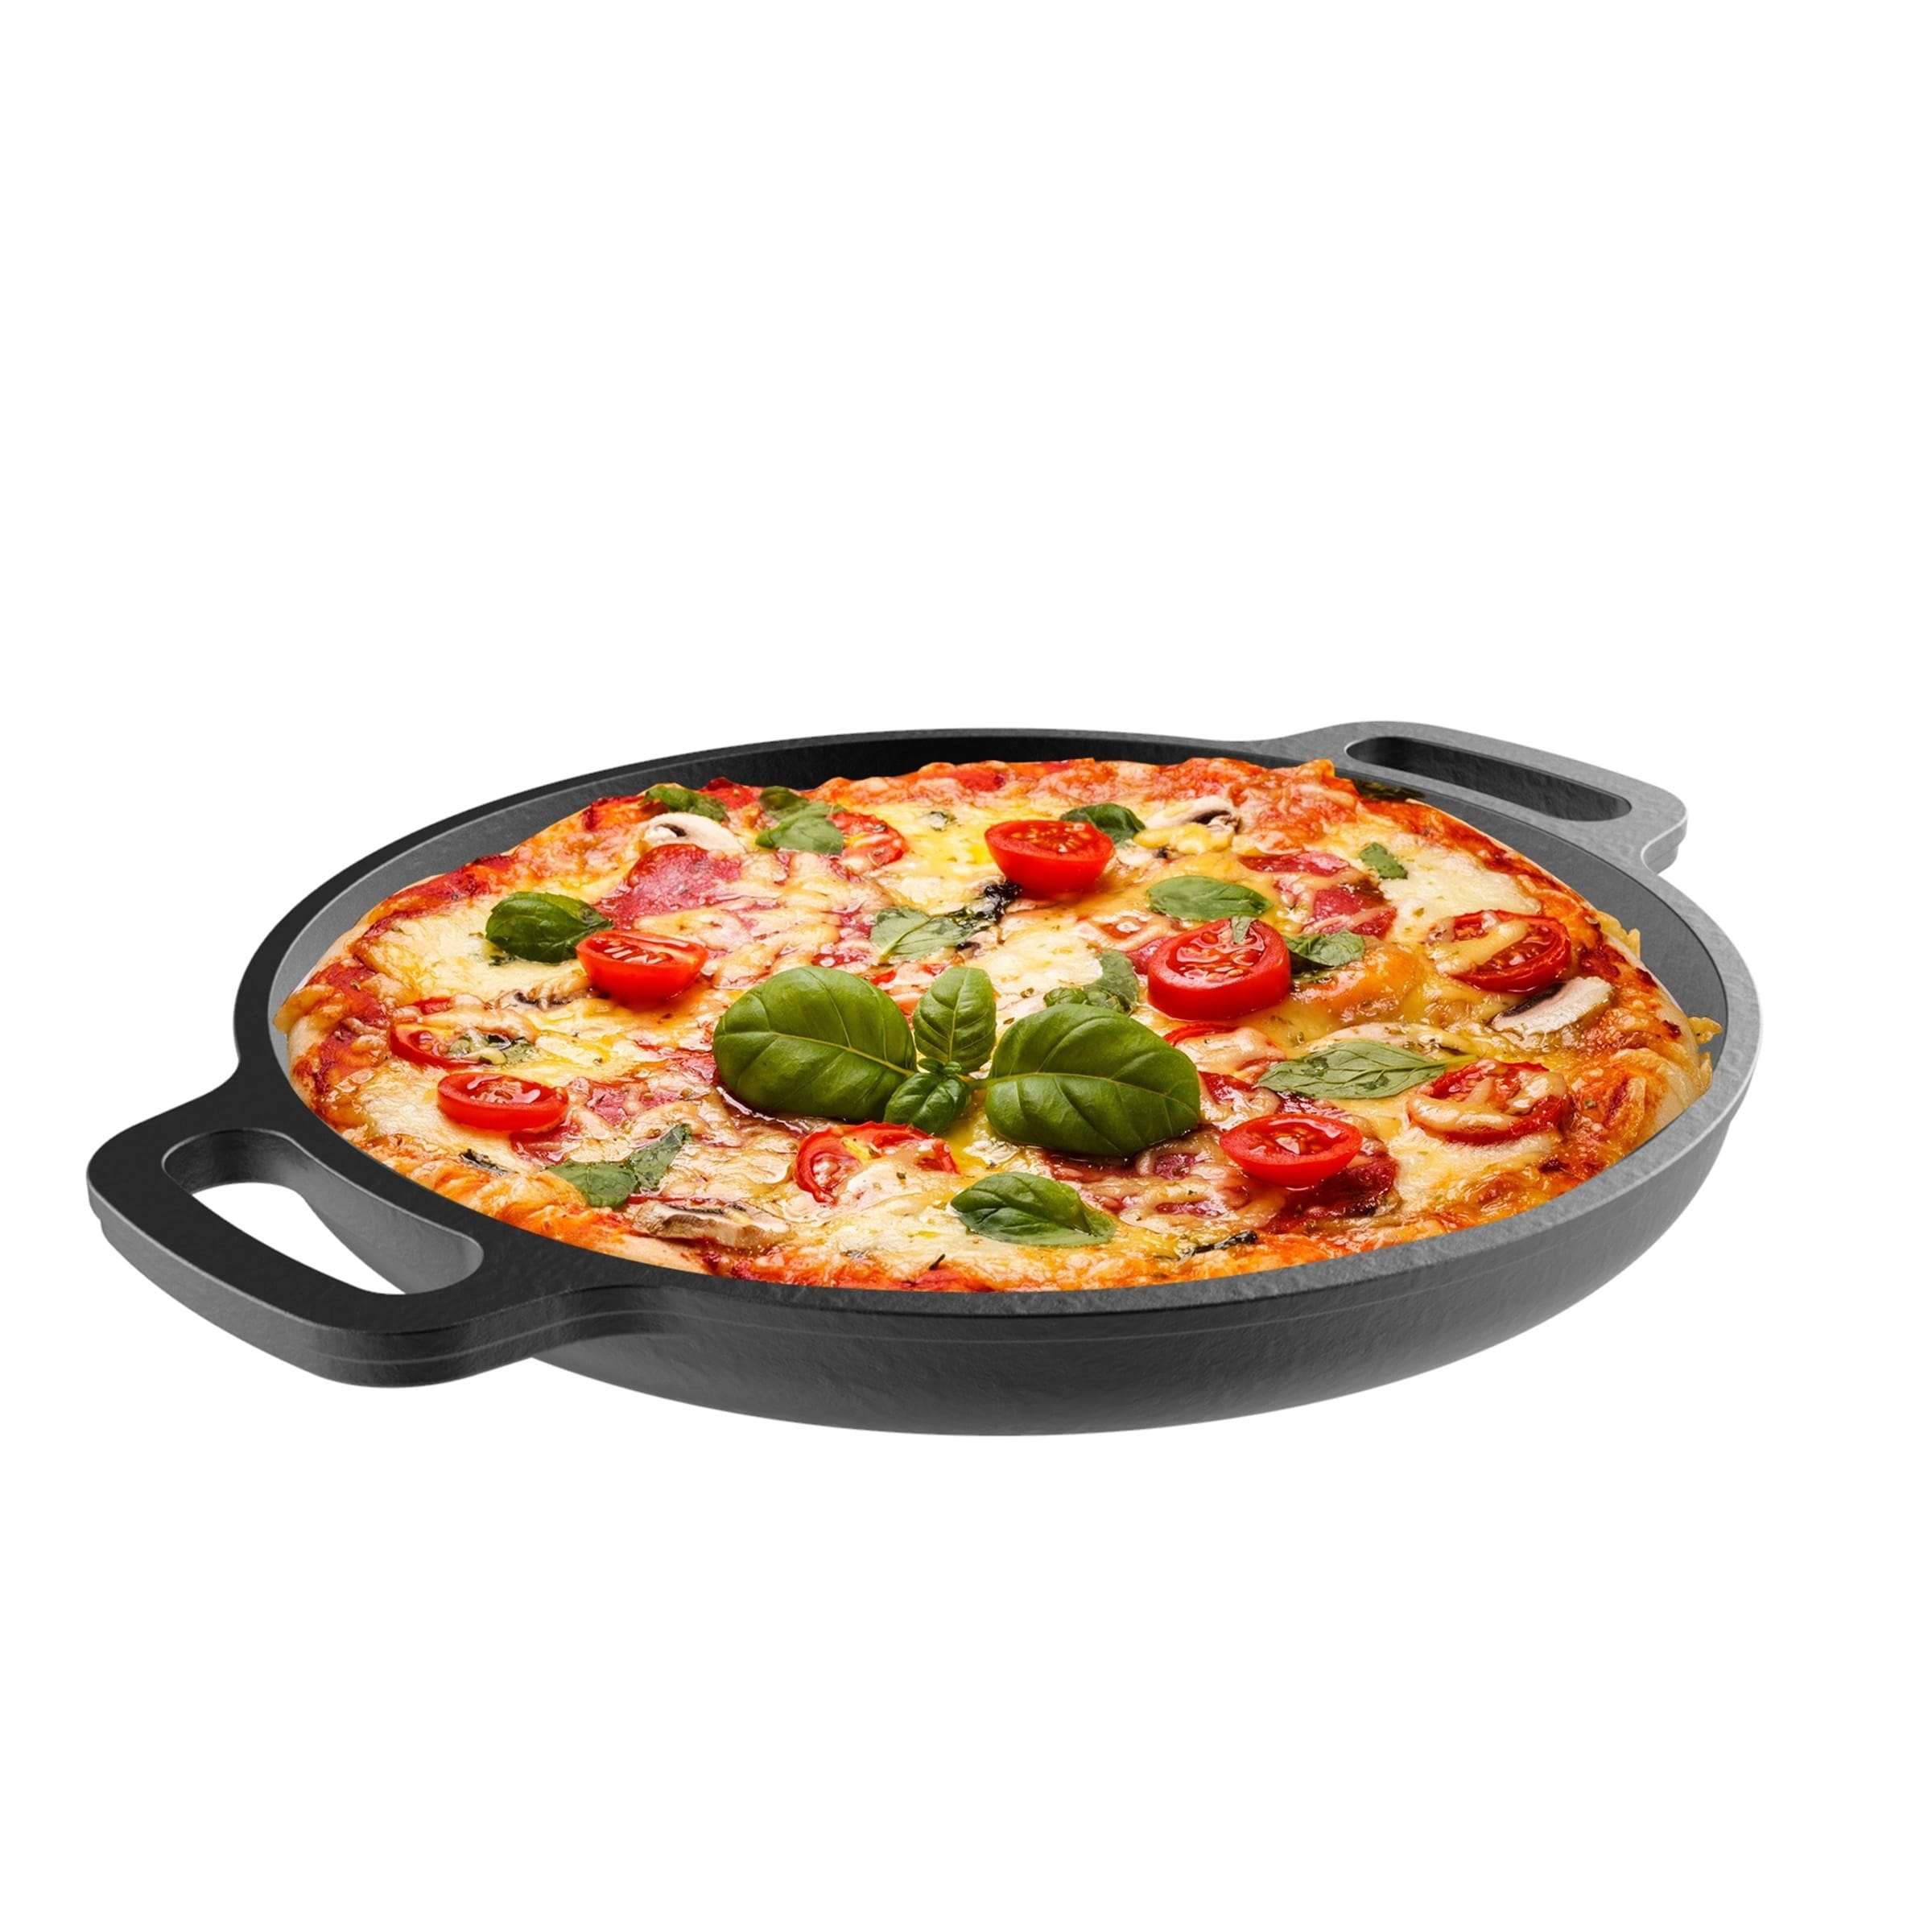 Home-Complete 14 inch Cast Iron Pizza Pan, Skillet Kitchen Cookware